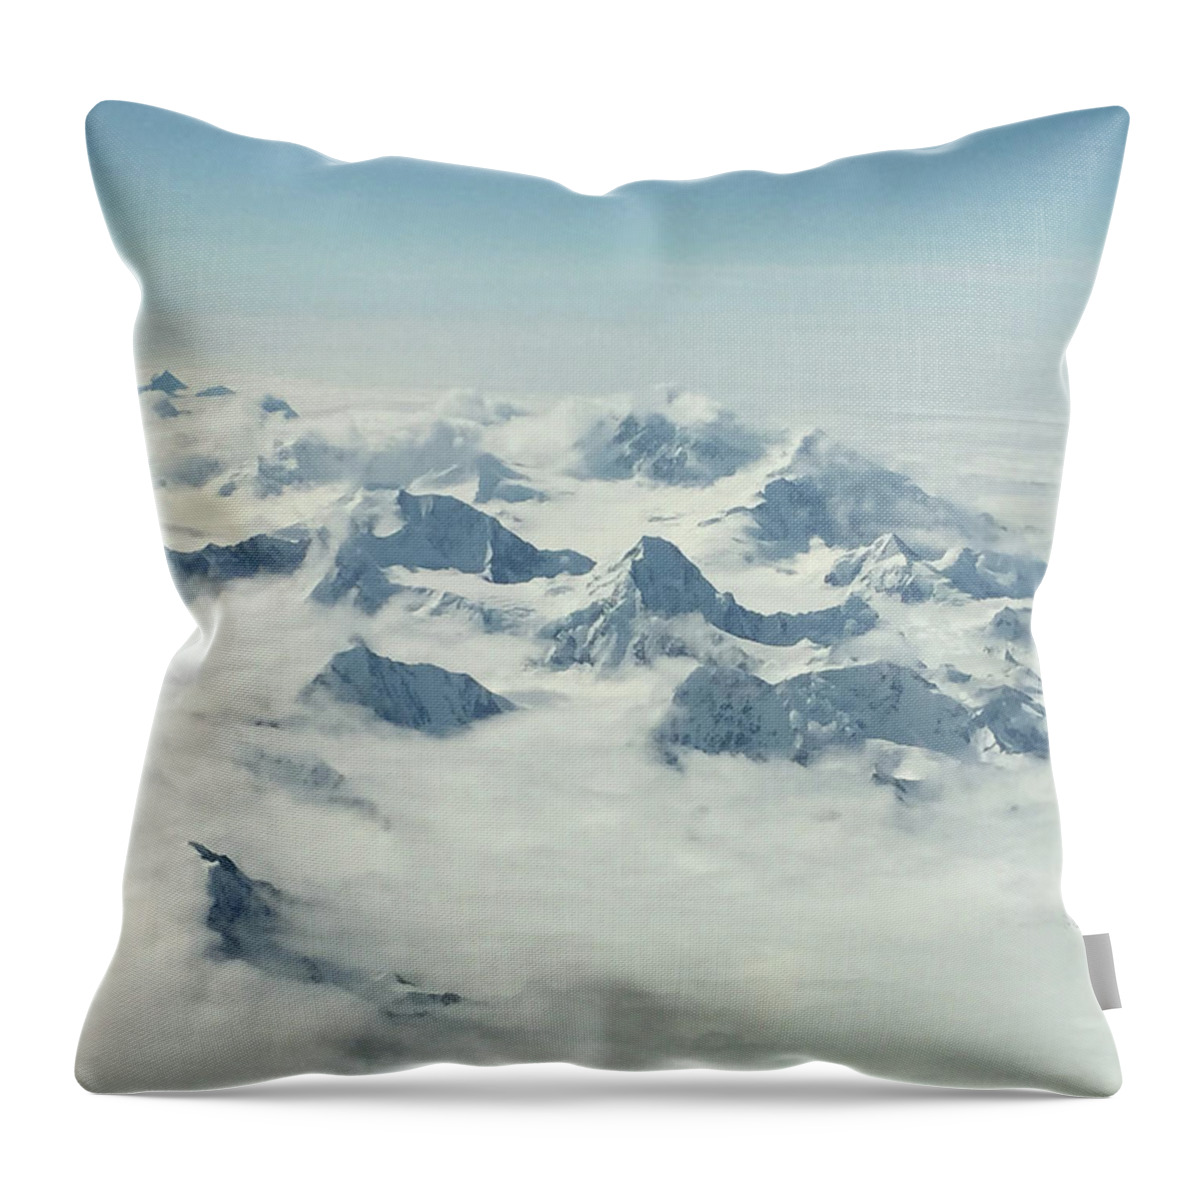 Alaskan Mountain Range Throw Pillow featuring the photograph Juneau Area Mountains by Stoneworks Imagery